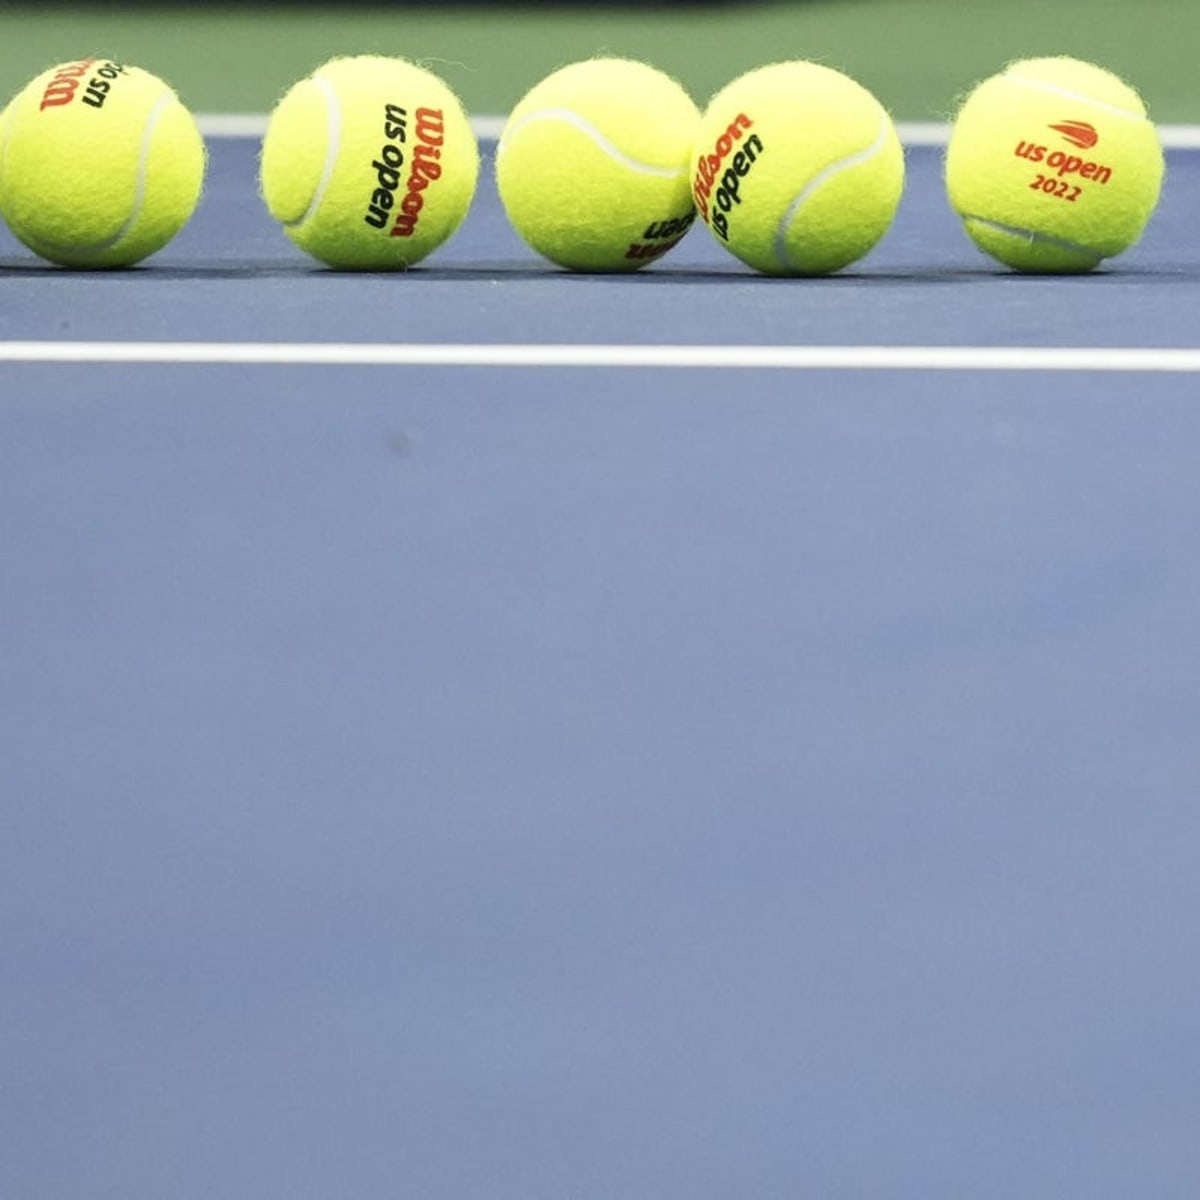 Watch Miami Open ATP Round of 16, WTA Quarterfinal Stream tennis live - How to Watch and Stream Major League and College Sports